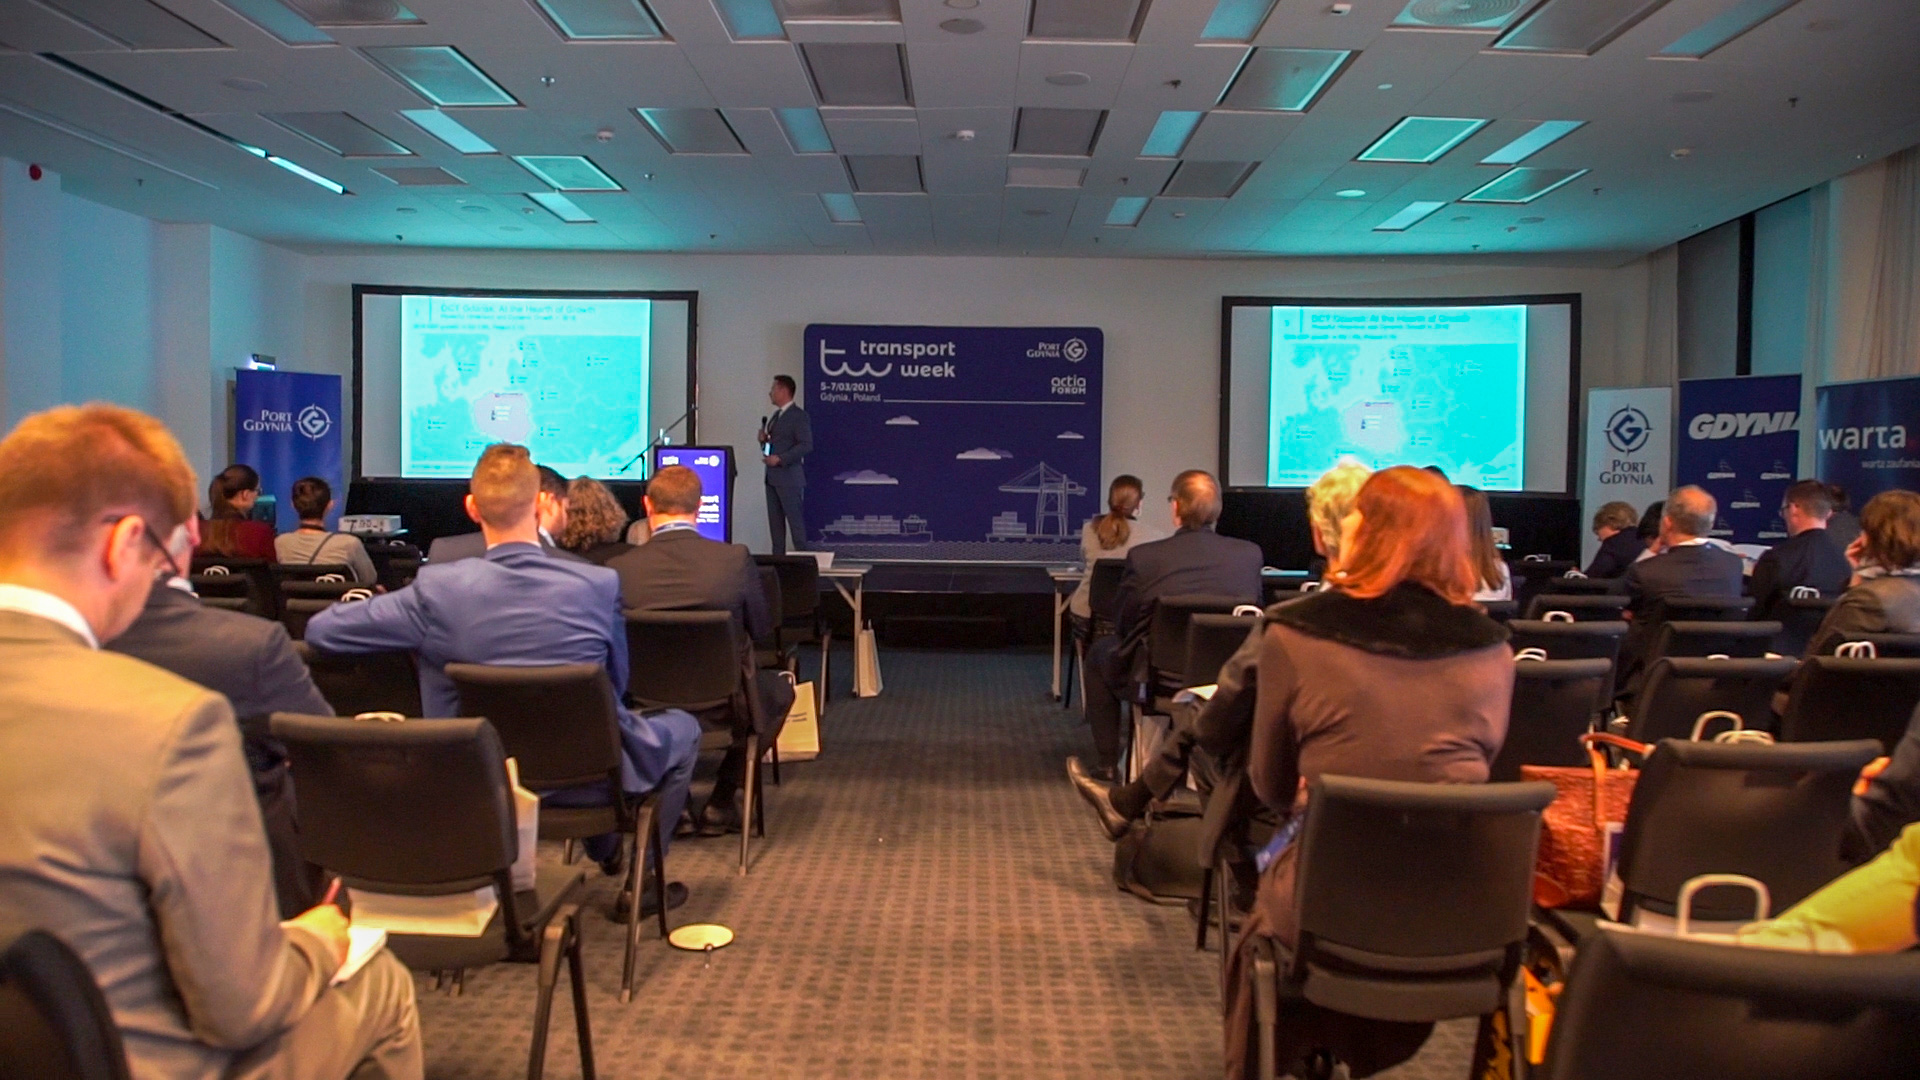 Divining the future of the port market – Transport Week 2019 kicks off in Gdynia - MarinePoland.com